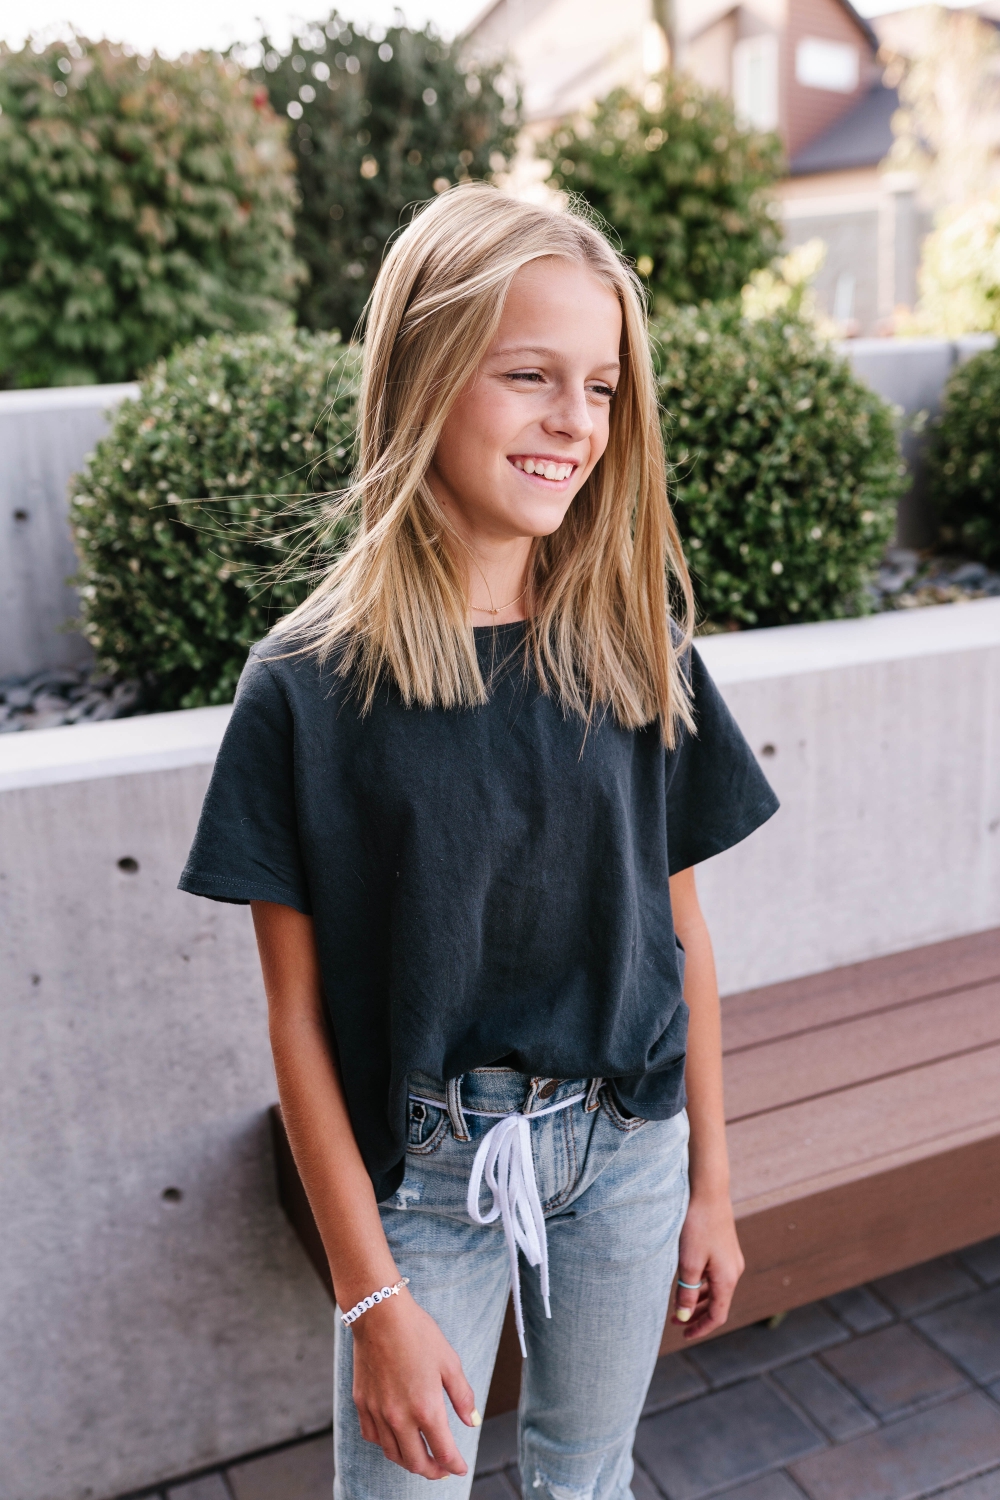 Tween Girls' Clothes: Cool Preteen Clothing for Big Girls